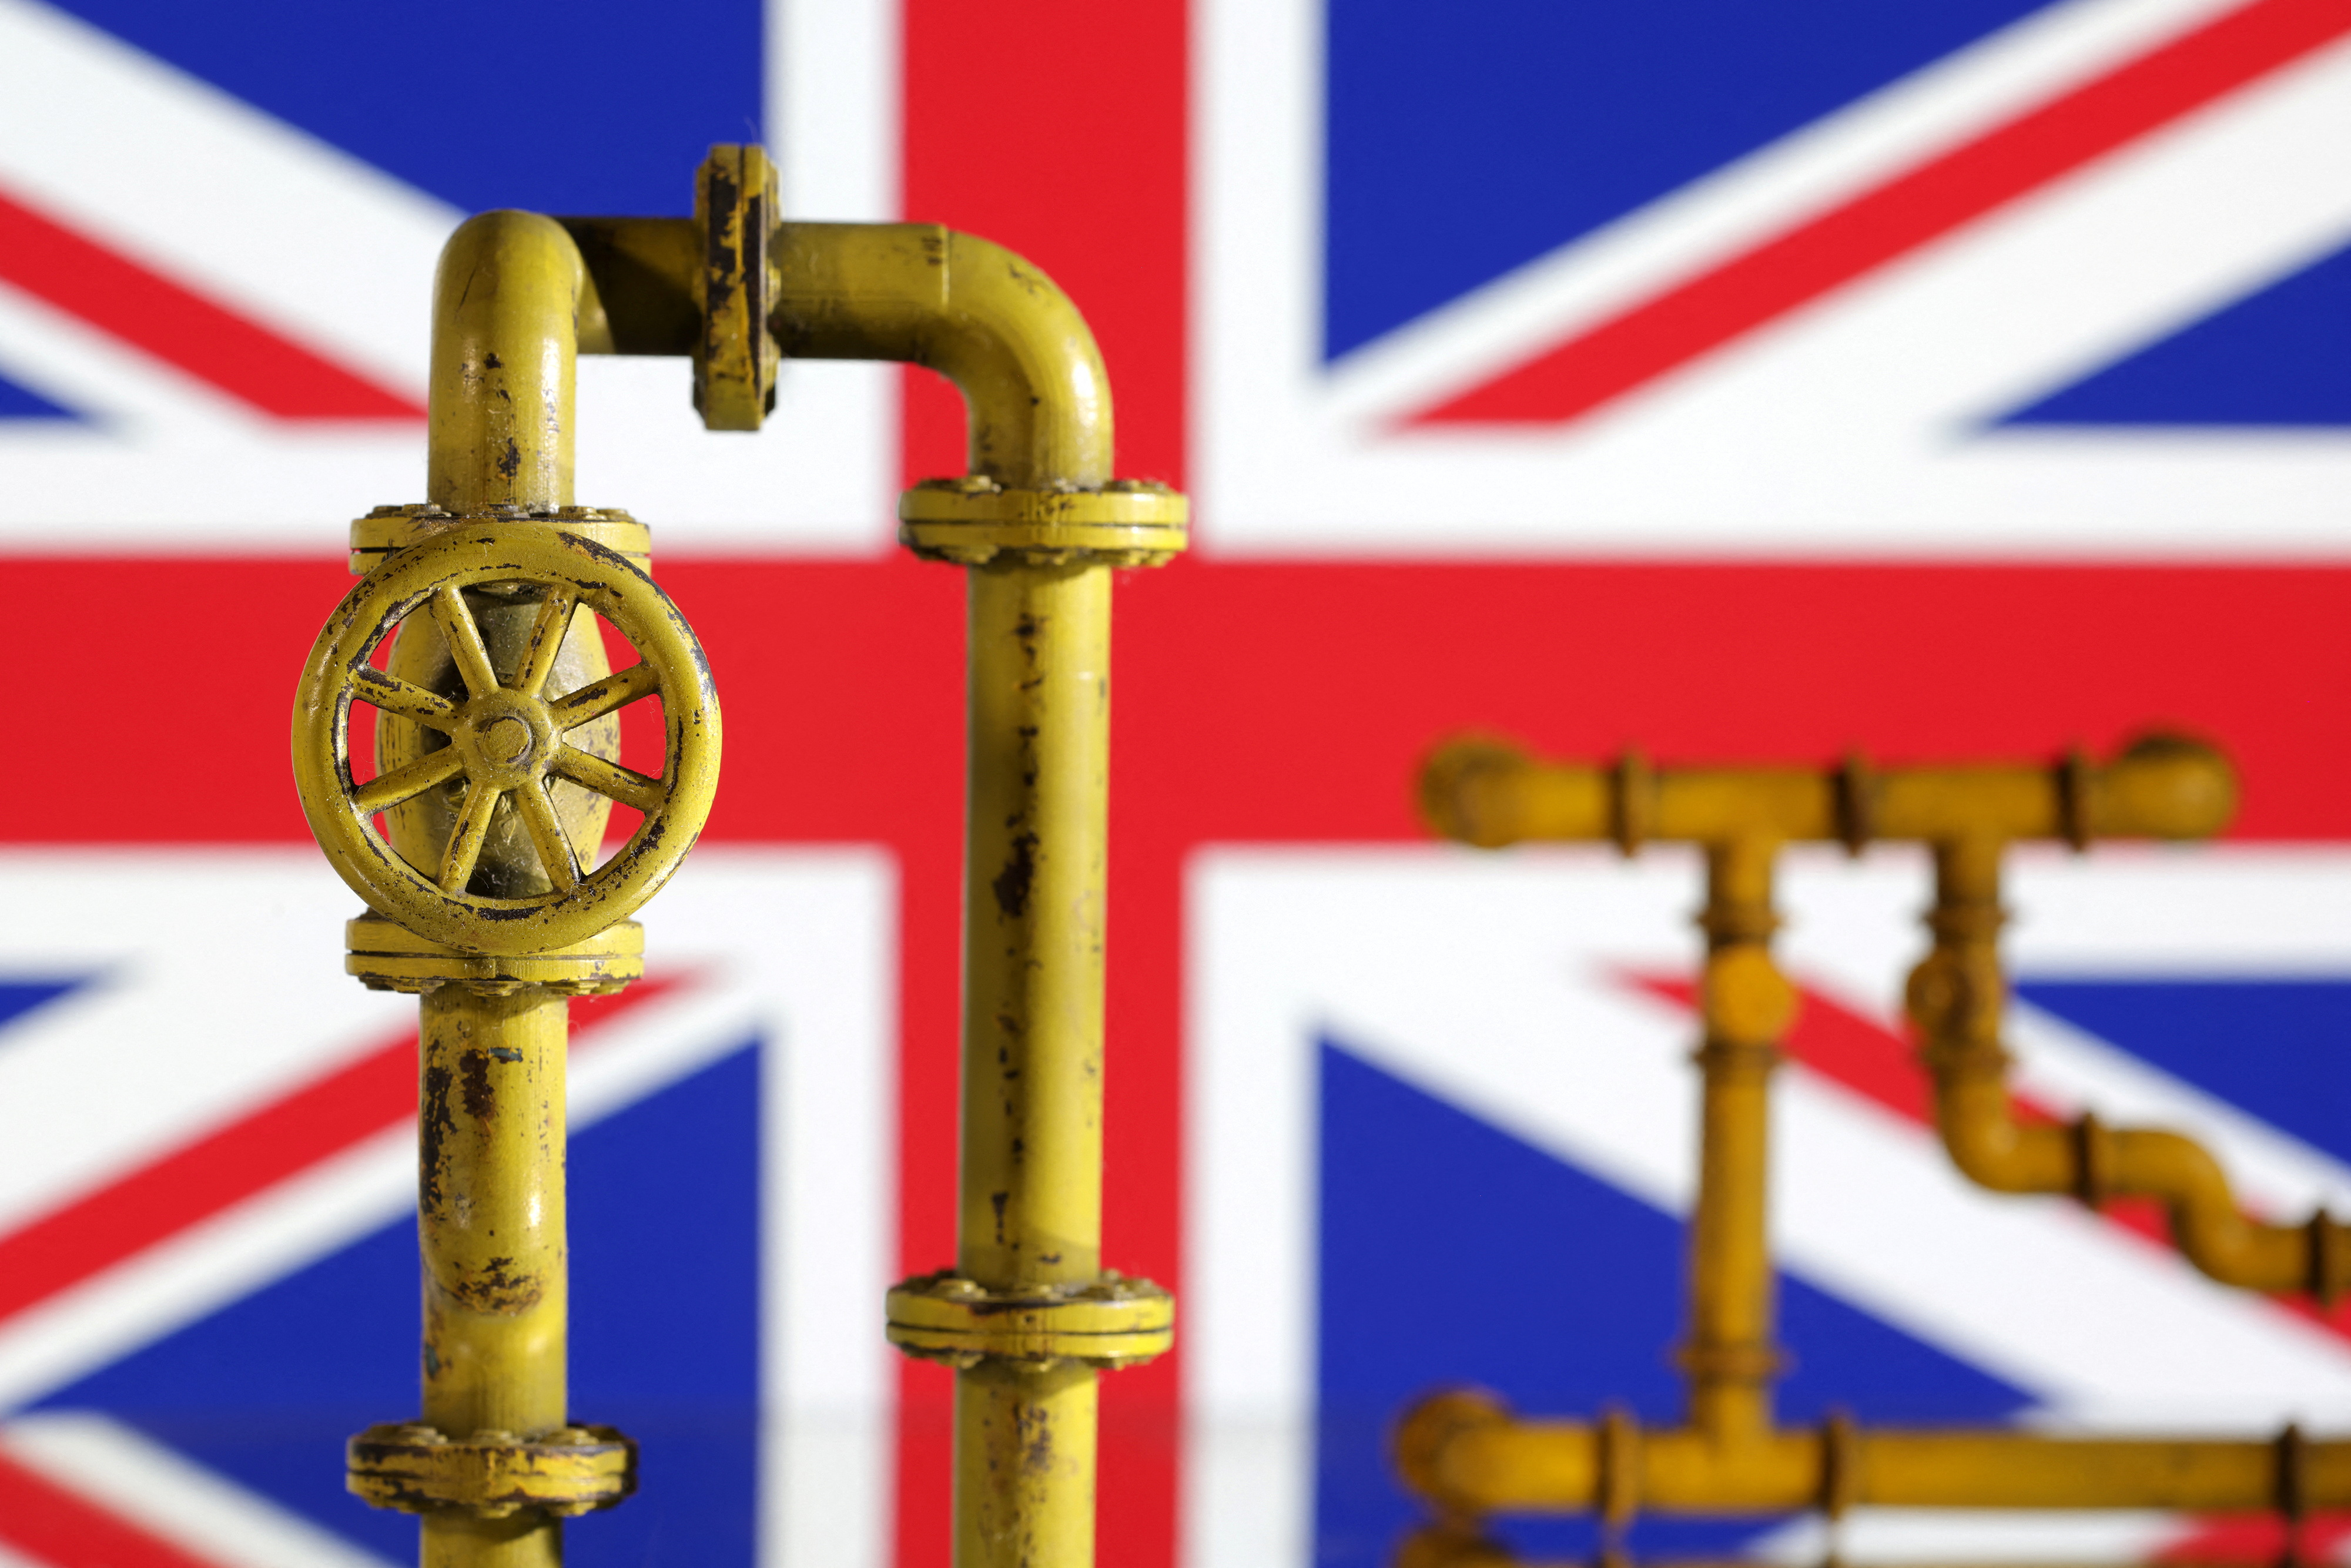 Illustration shows natural gas pipeline and UK flag